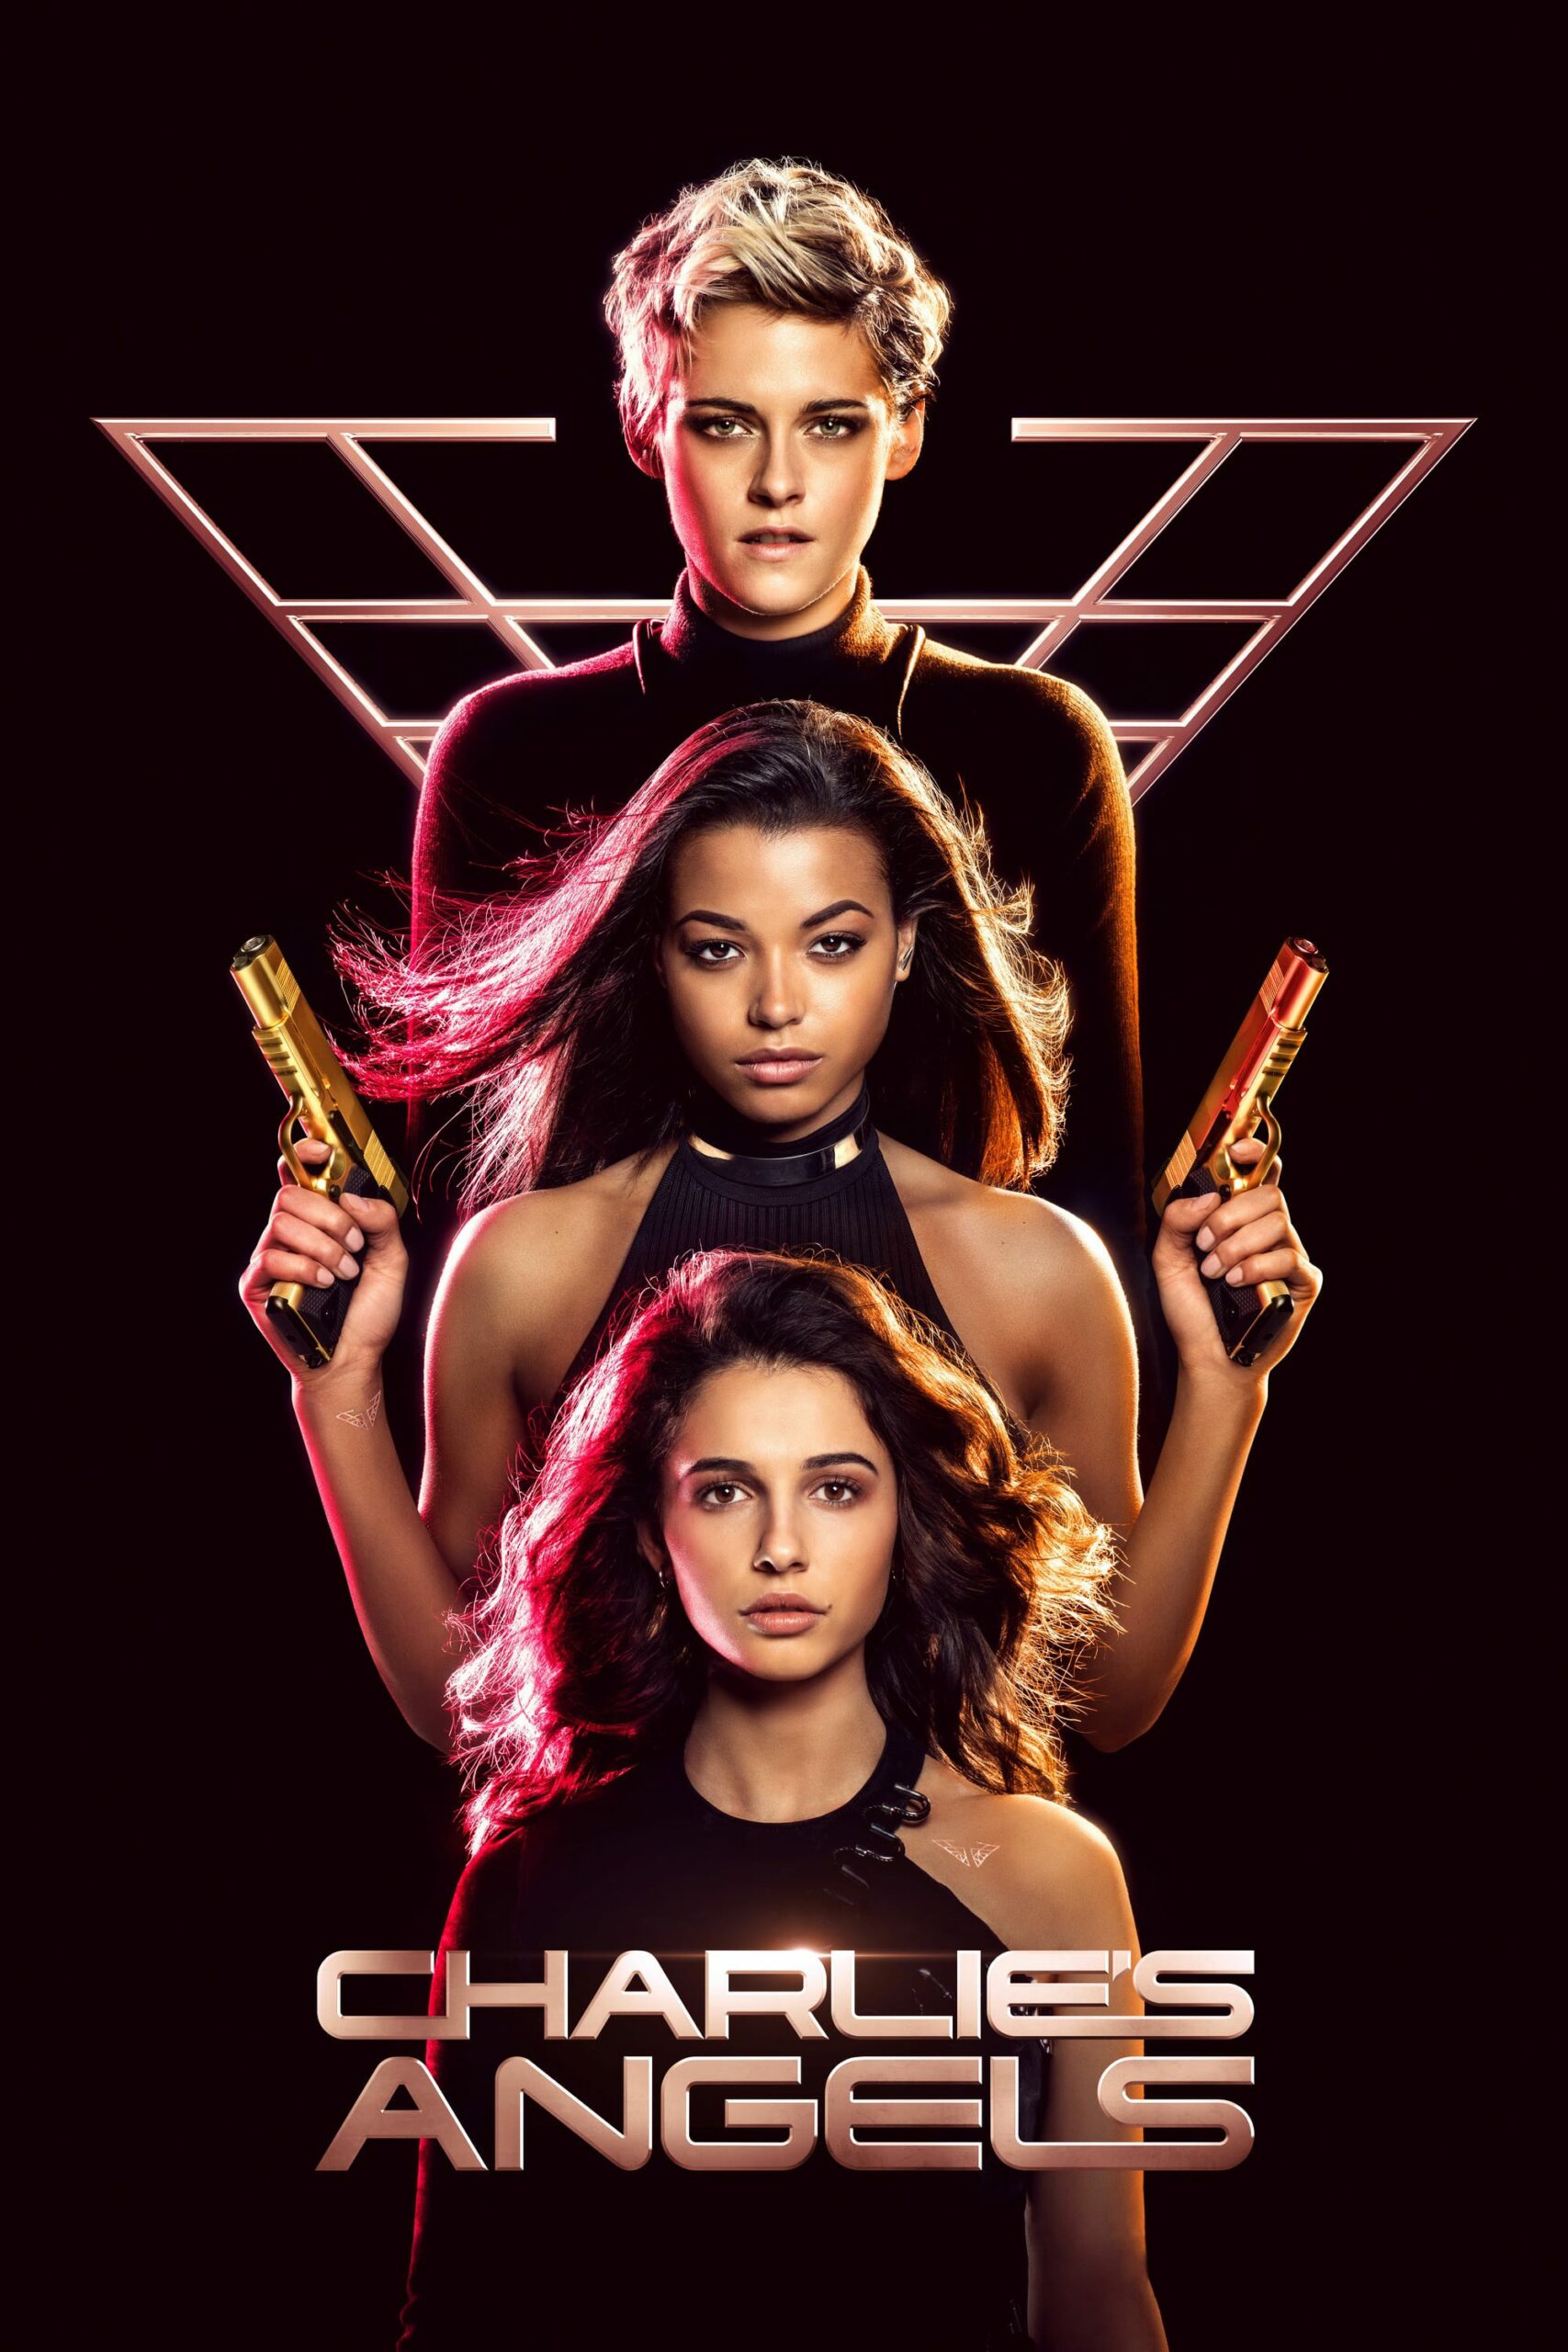 Poster for the movie "Charlie's Angels"